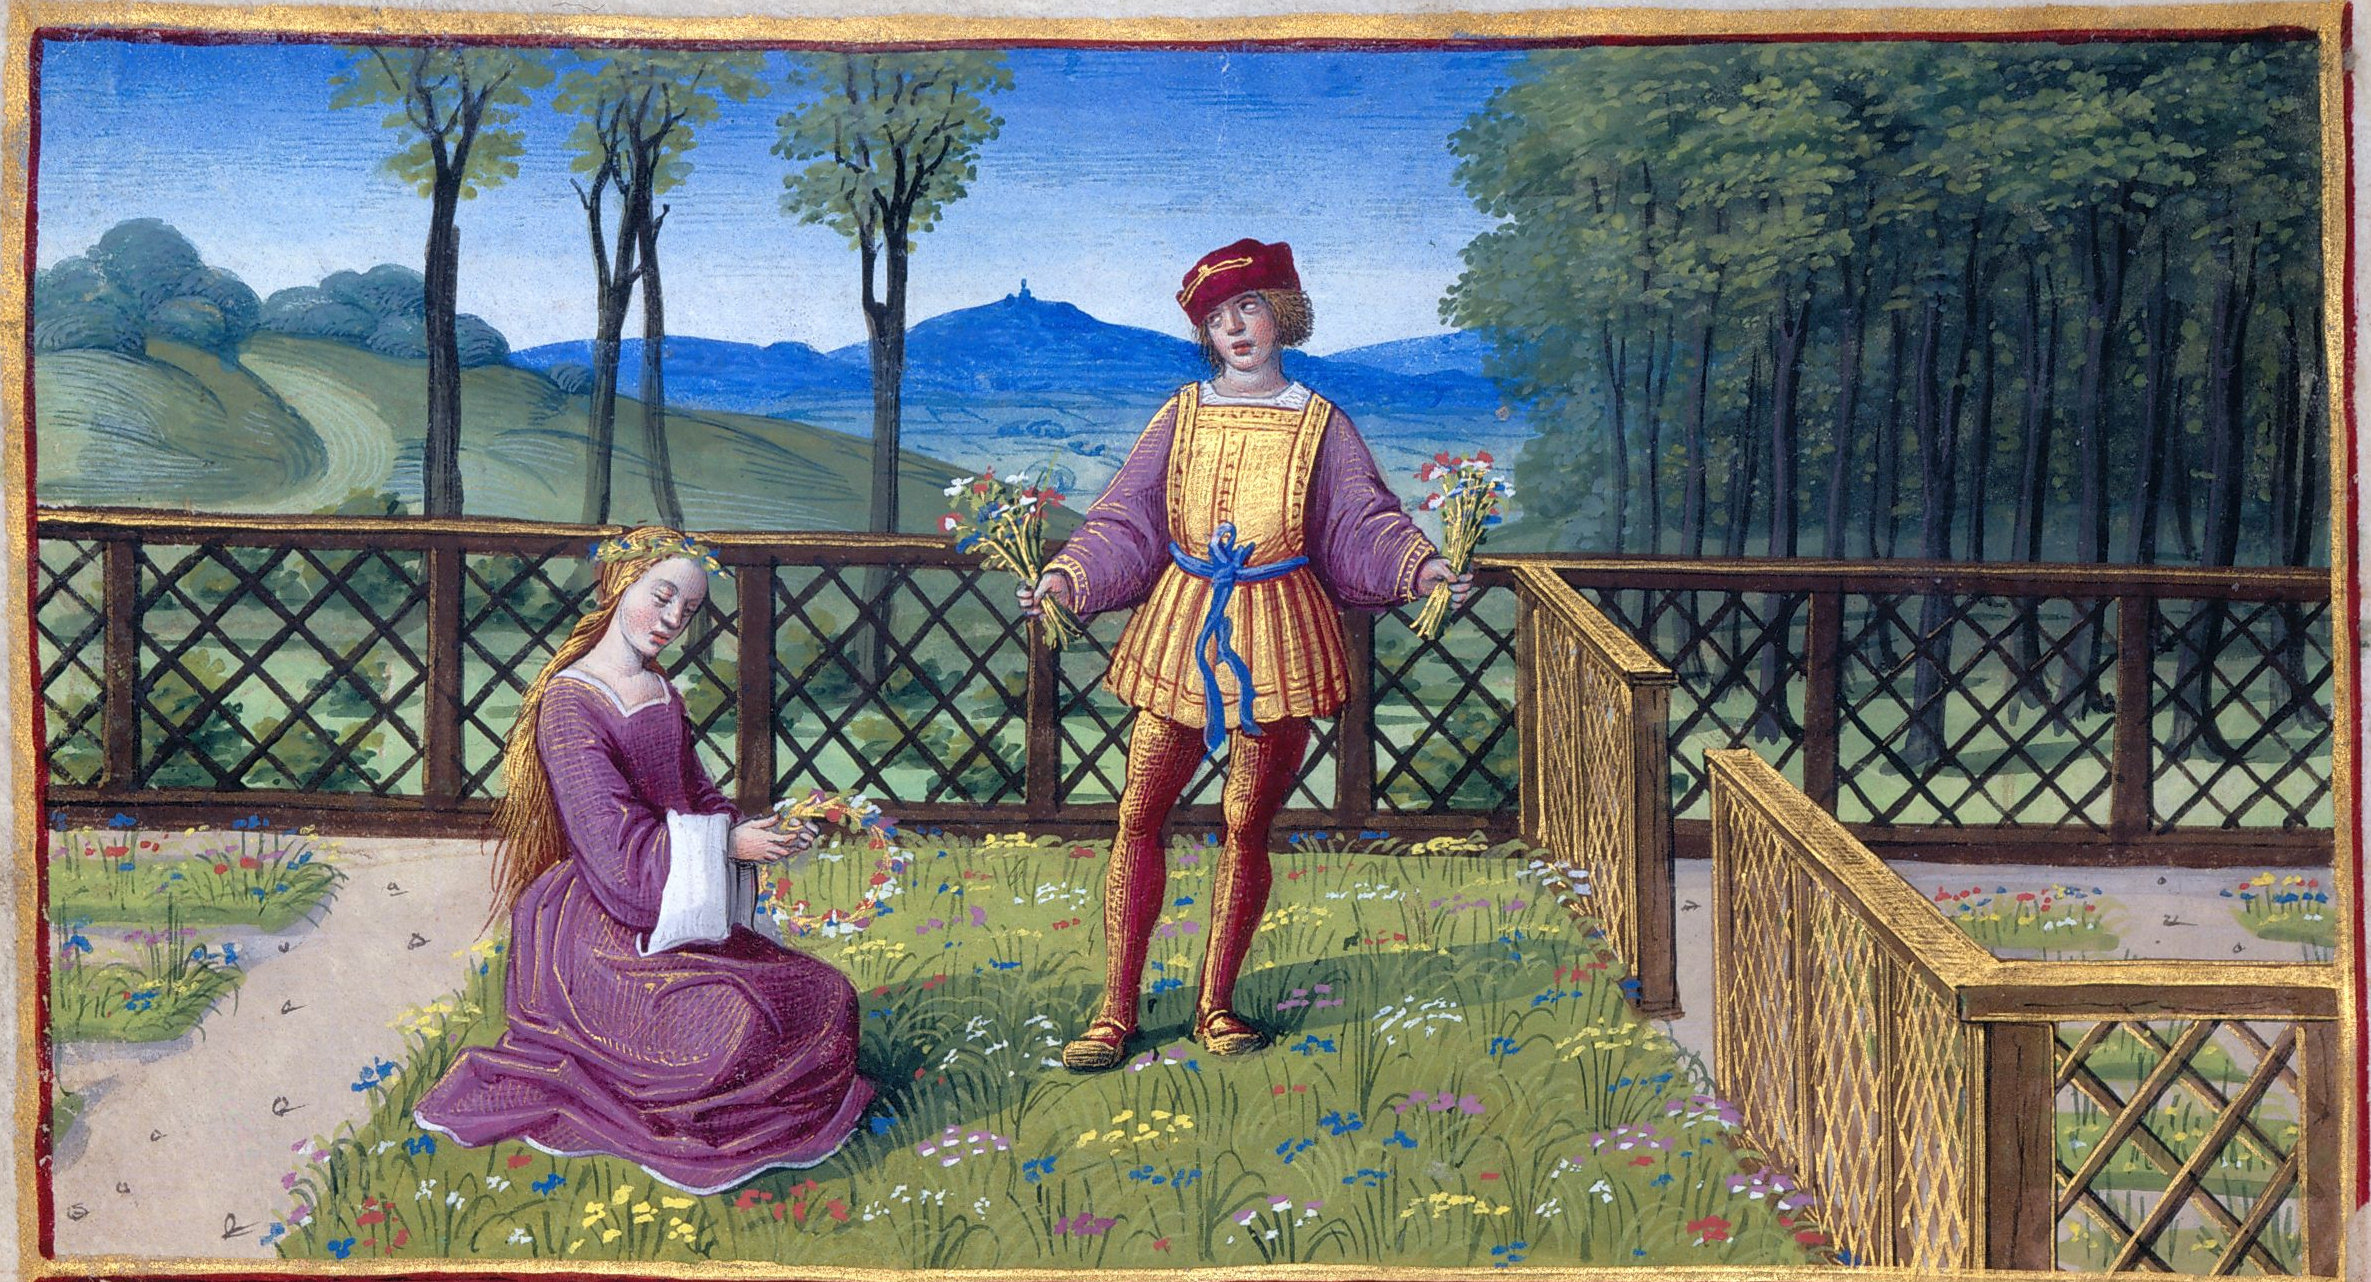 1500 - Book of Hours by Jean Poyer, known as The Hours of Henry VIII - April: Picking Flowers and Making Wreaths